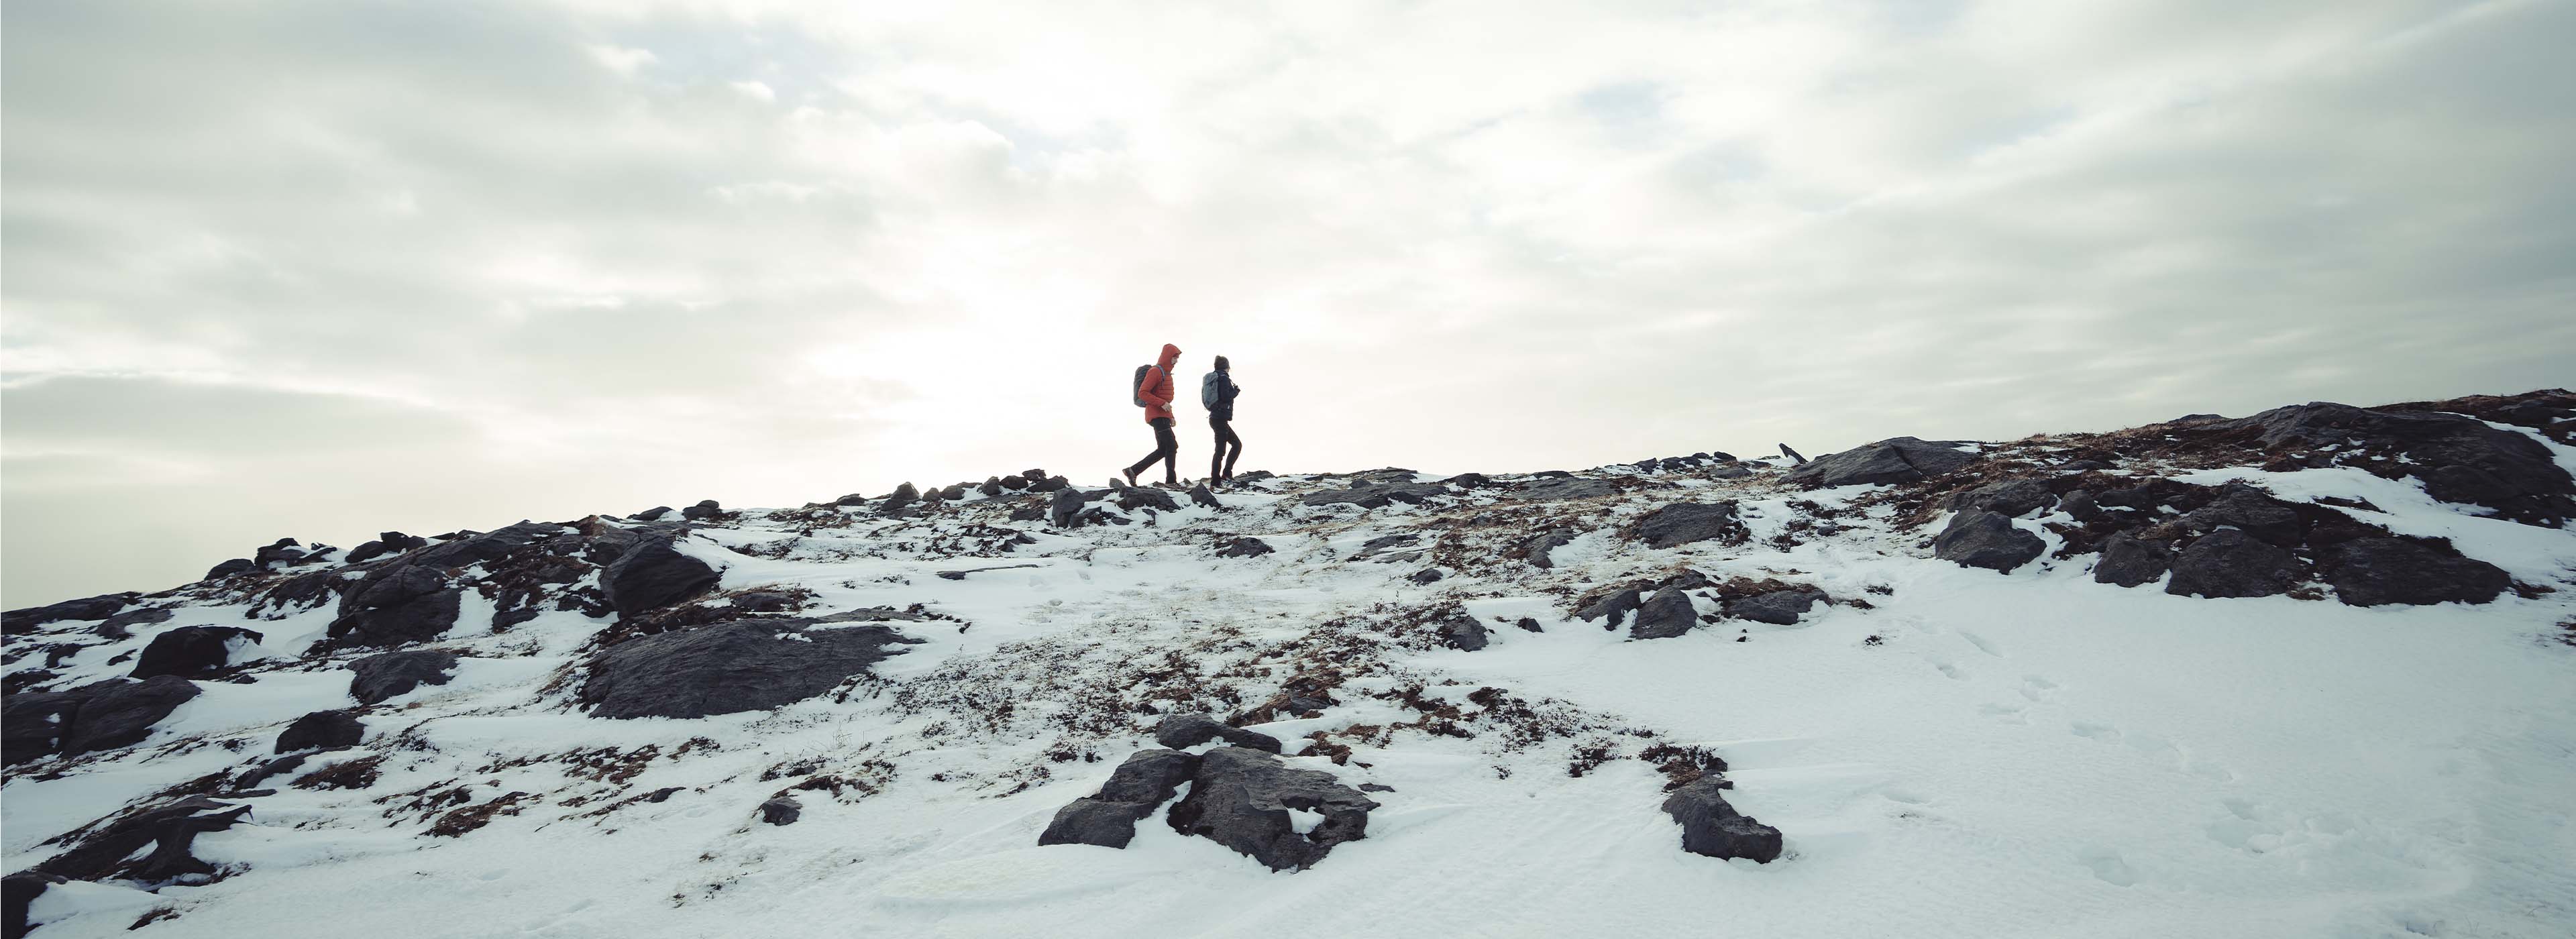 Men and women hiking in the snow with outdoor clothing